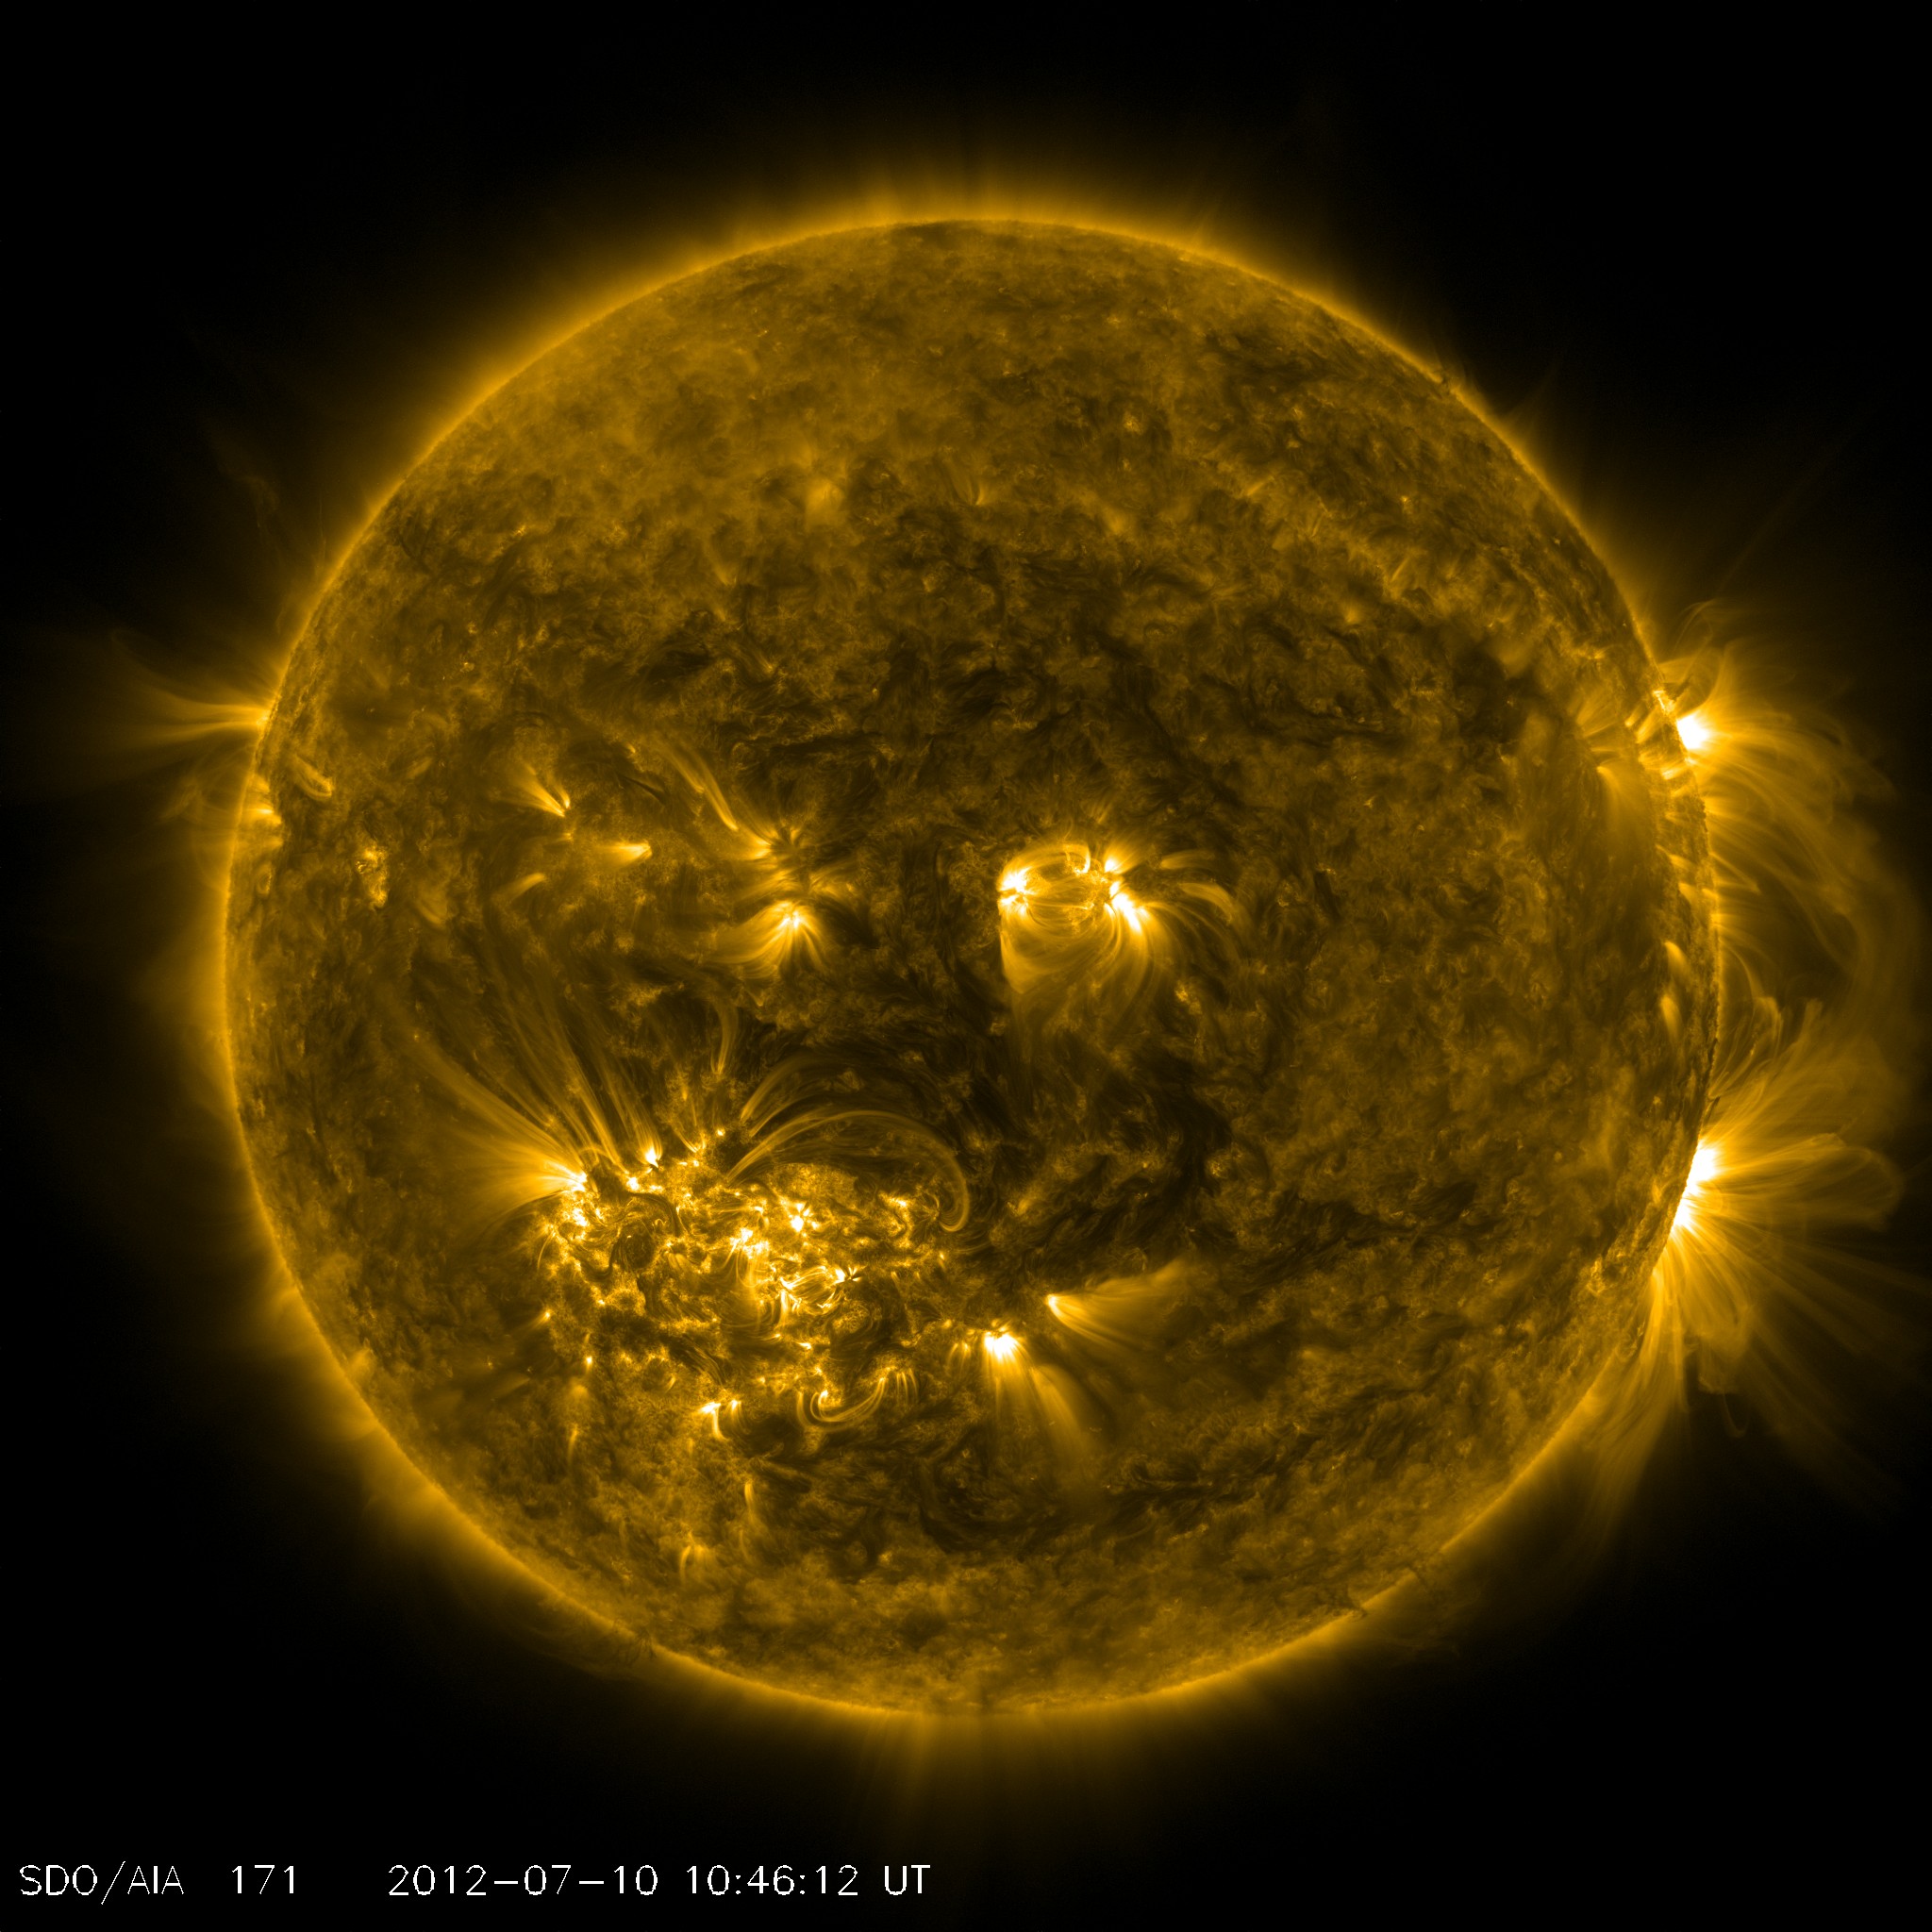 Two new M-class flares and geomagnetic storming in progress